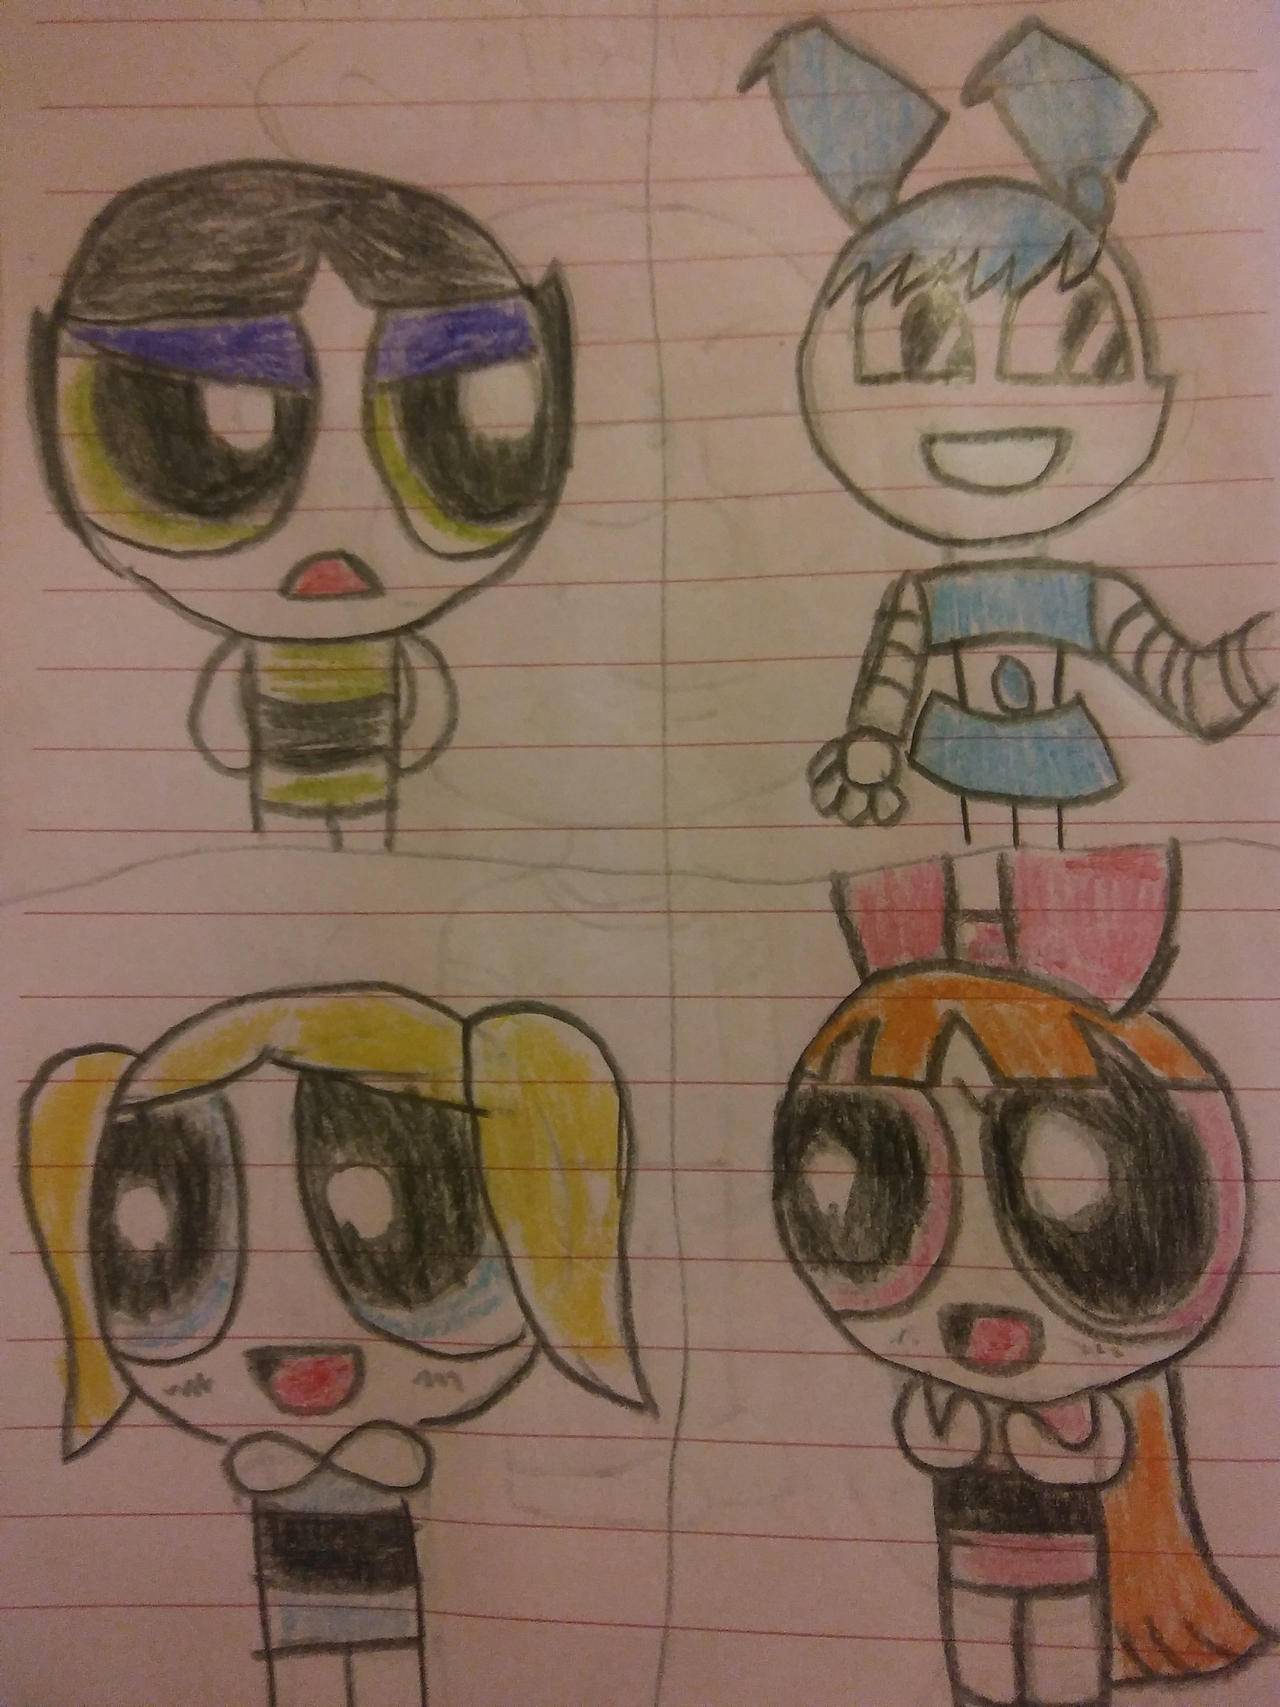 buttercup, blossom, bubbles, jenny wakeman, mandy, and 17 more (powerpuff  girls and 16 more) drawn by bleedman and ngo_(ngo_dandelion)